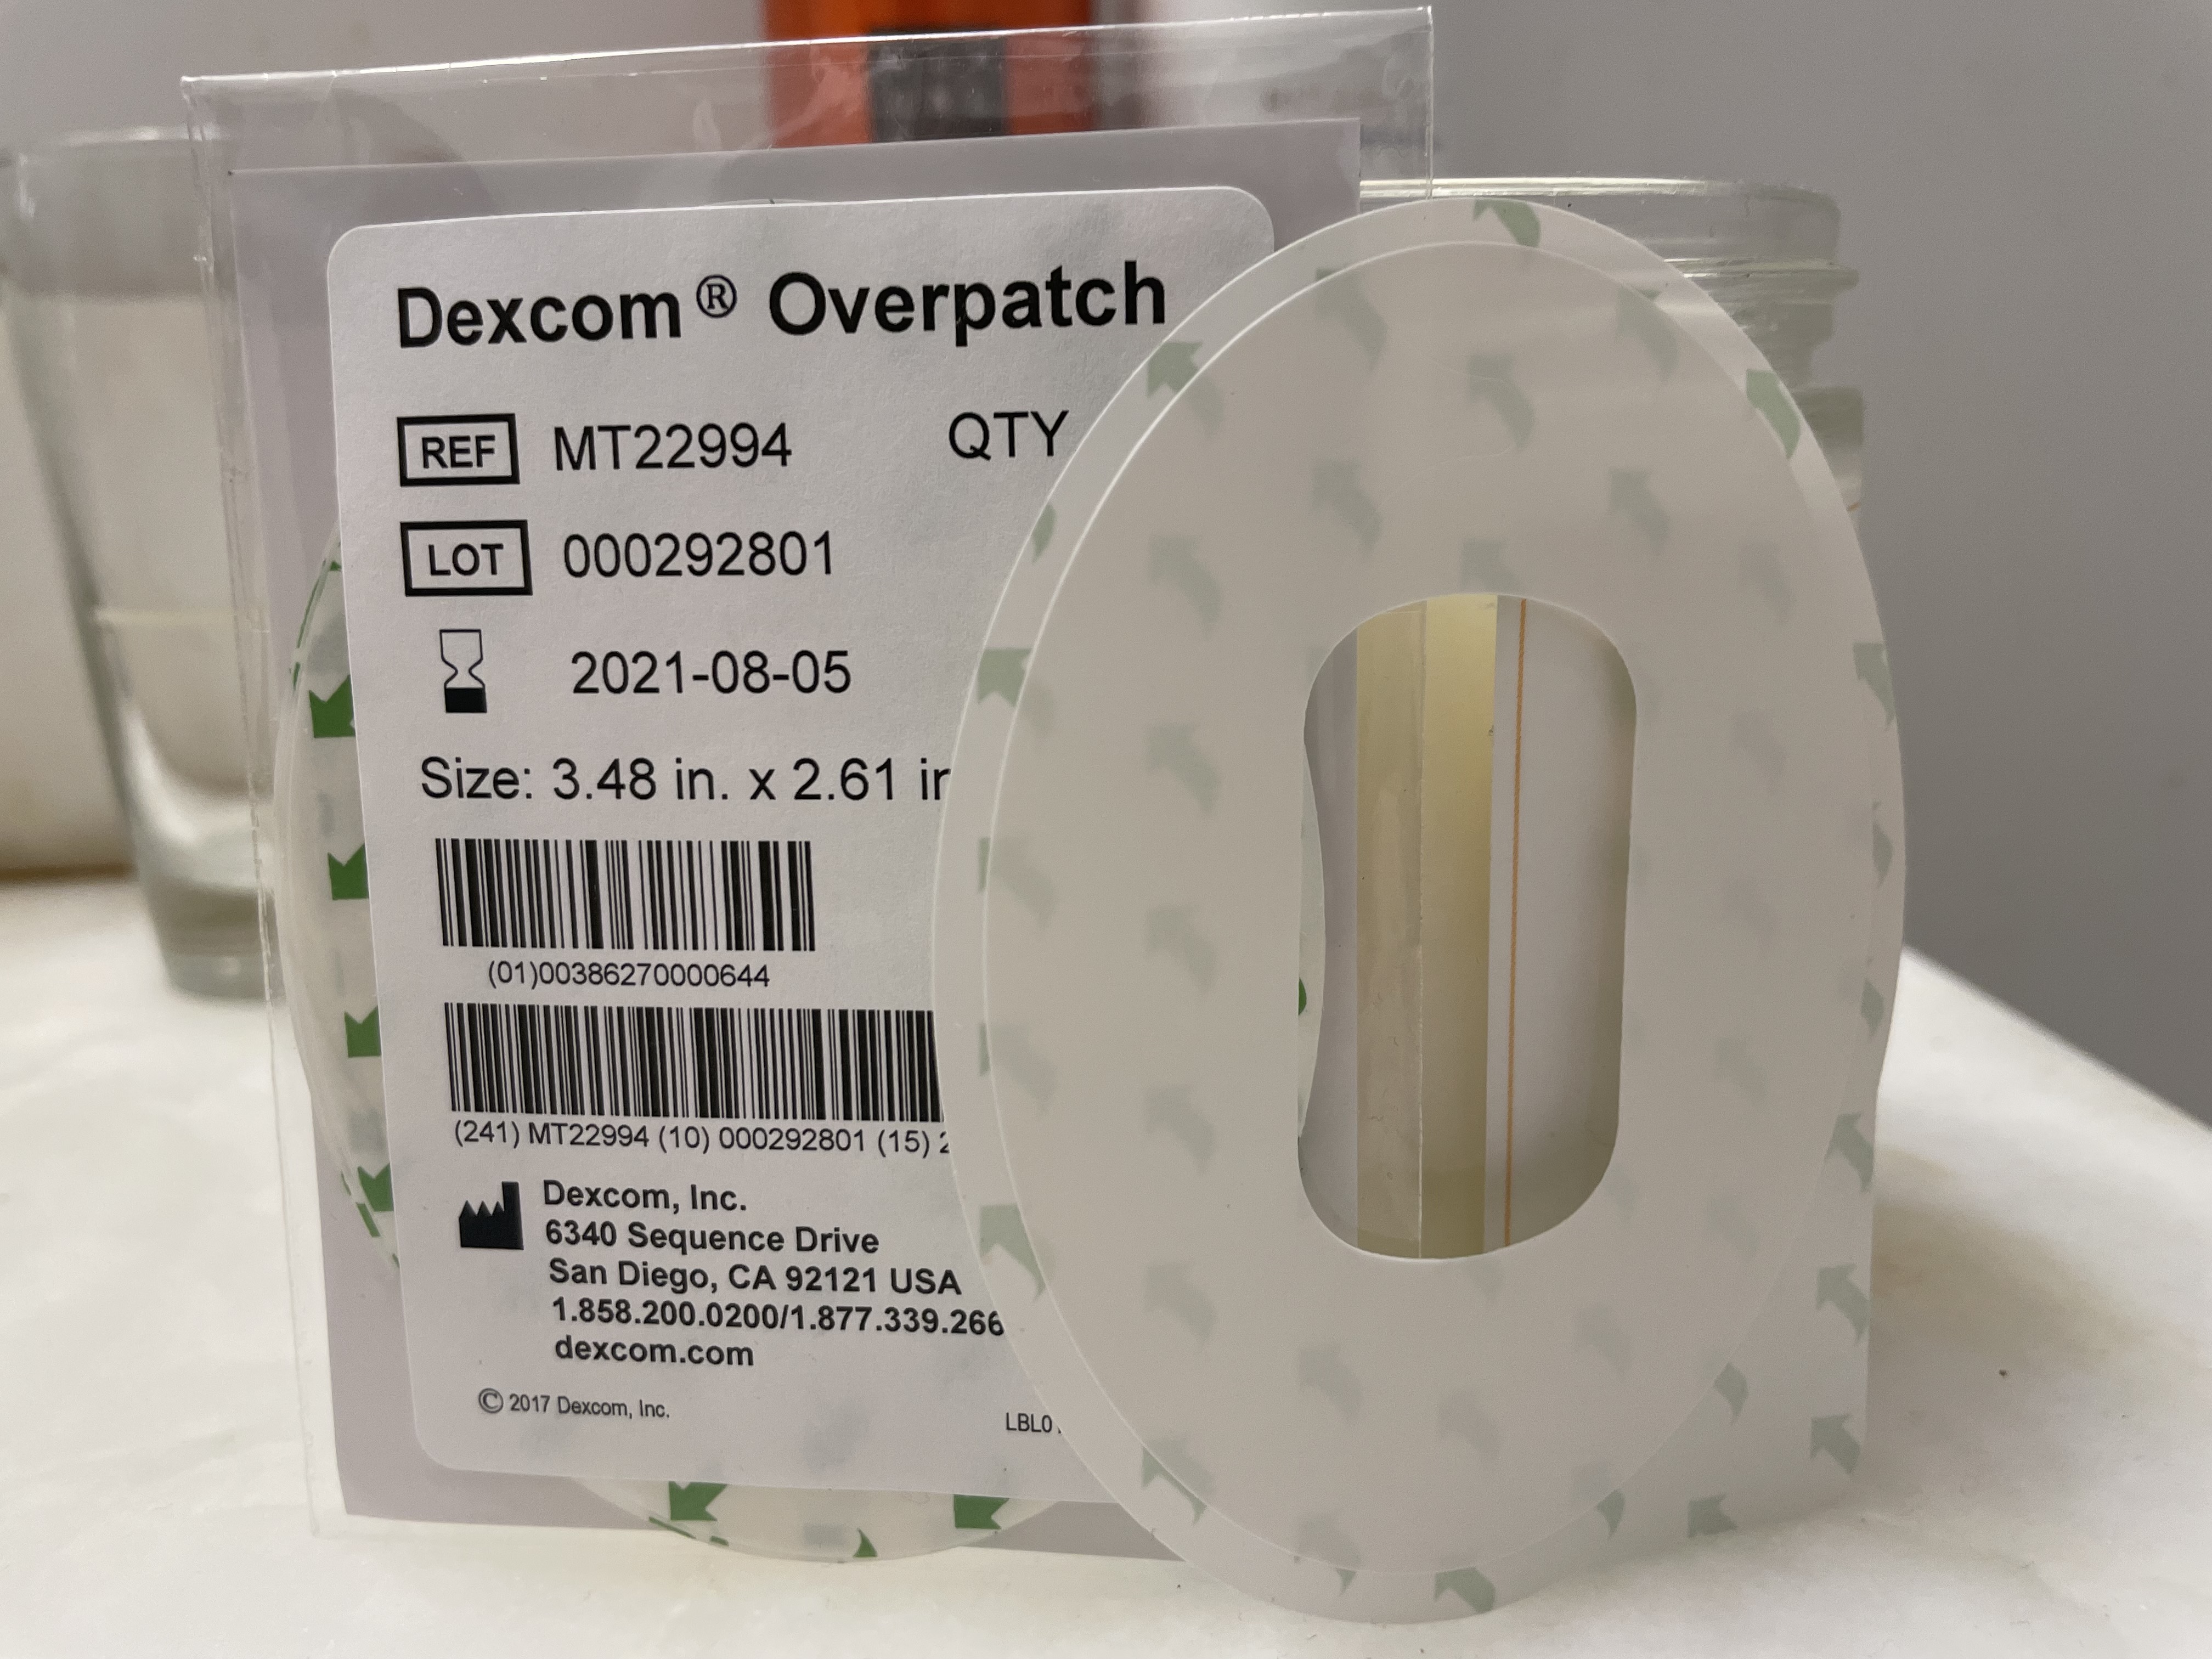 Dexcom offers Overpatches for the G6